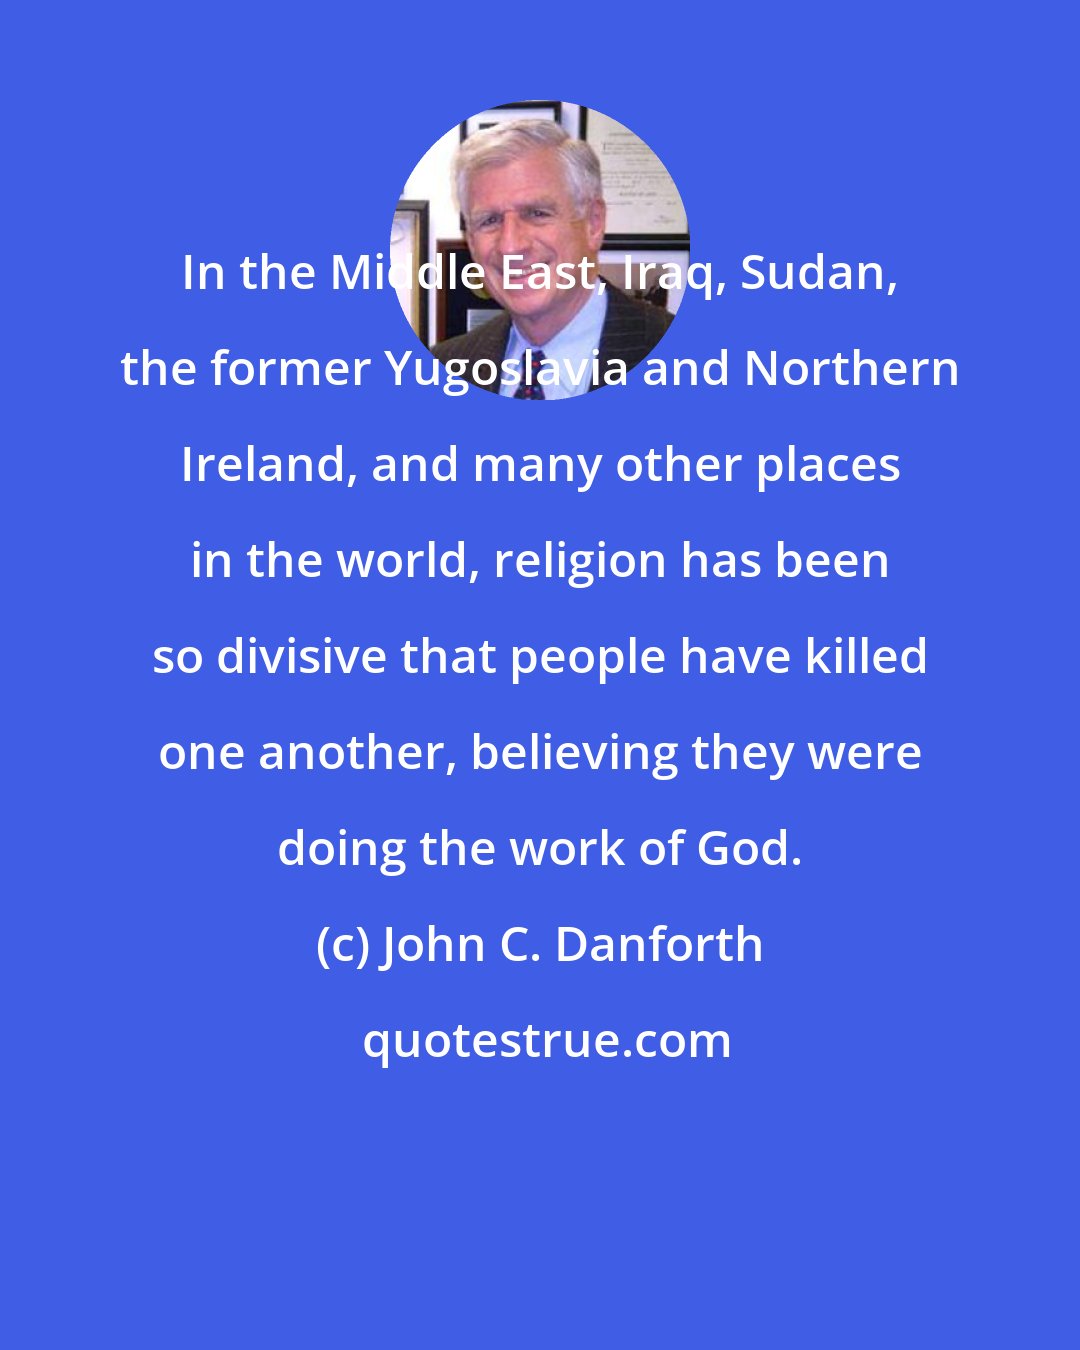 John C. Danforth: In the Middle East, Iraq, Sudan, the former Yugoslavia and Northern Ireland, and many other places in the world, religion has been so divisive that people have killed one another, believing they were doing the work of God.